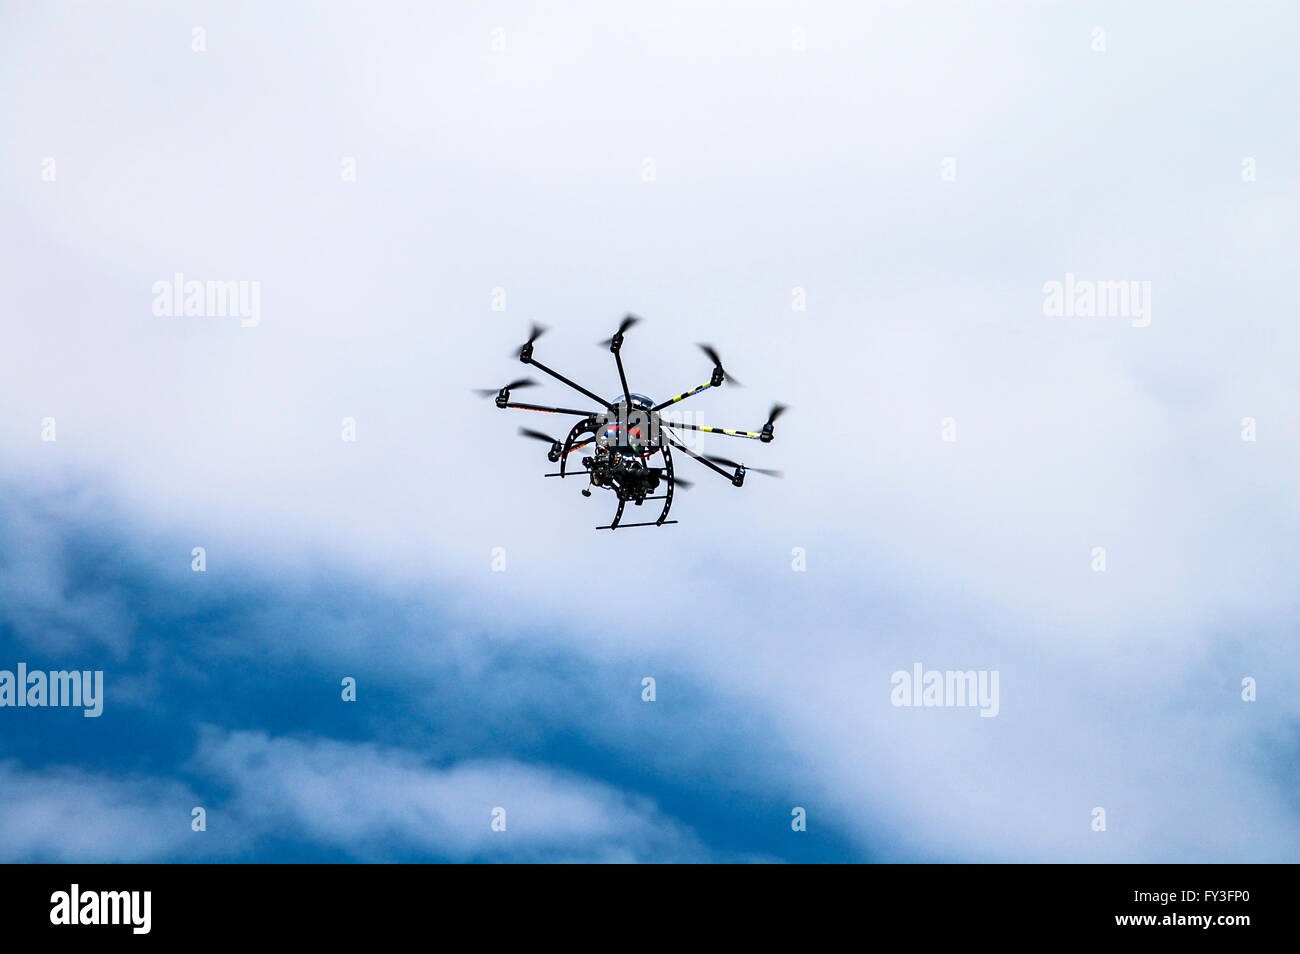 Aircraft type Dron photographed from the ground in flight and shooting events below it. Stock Photo